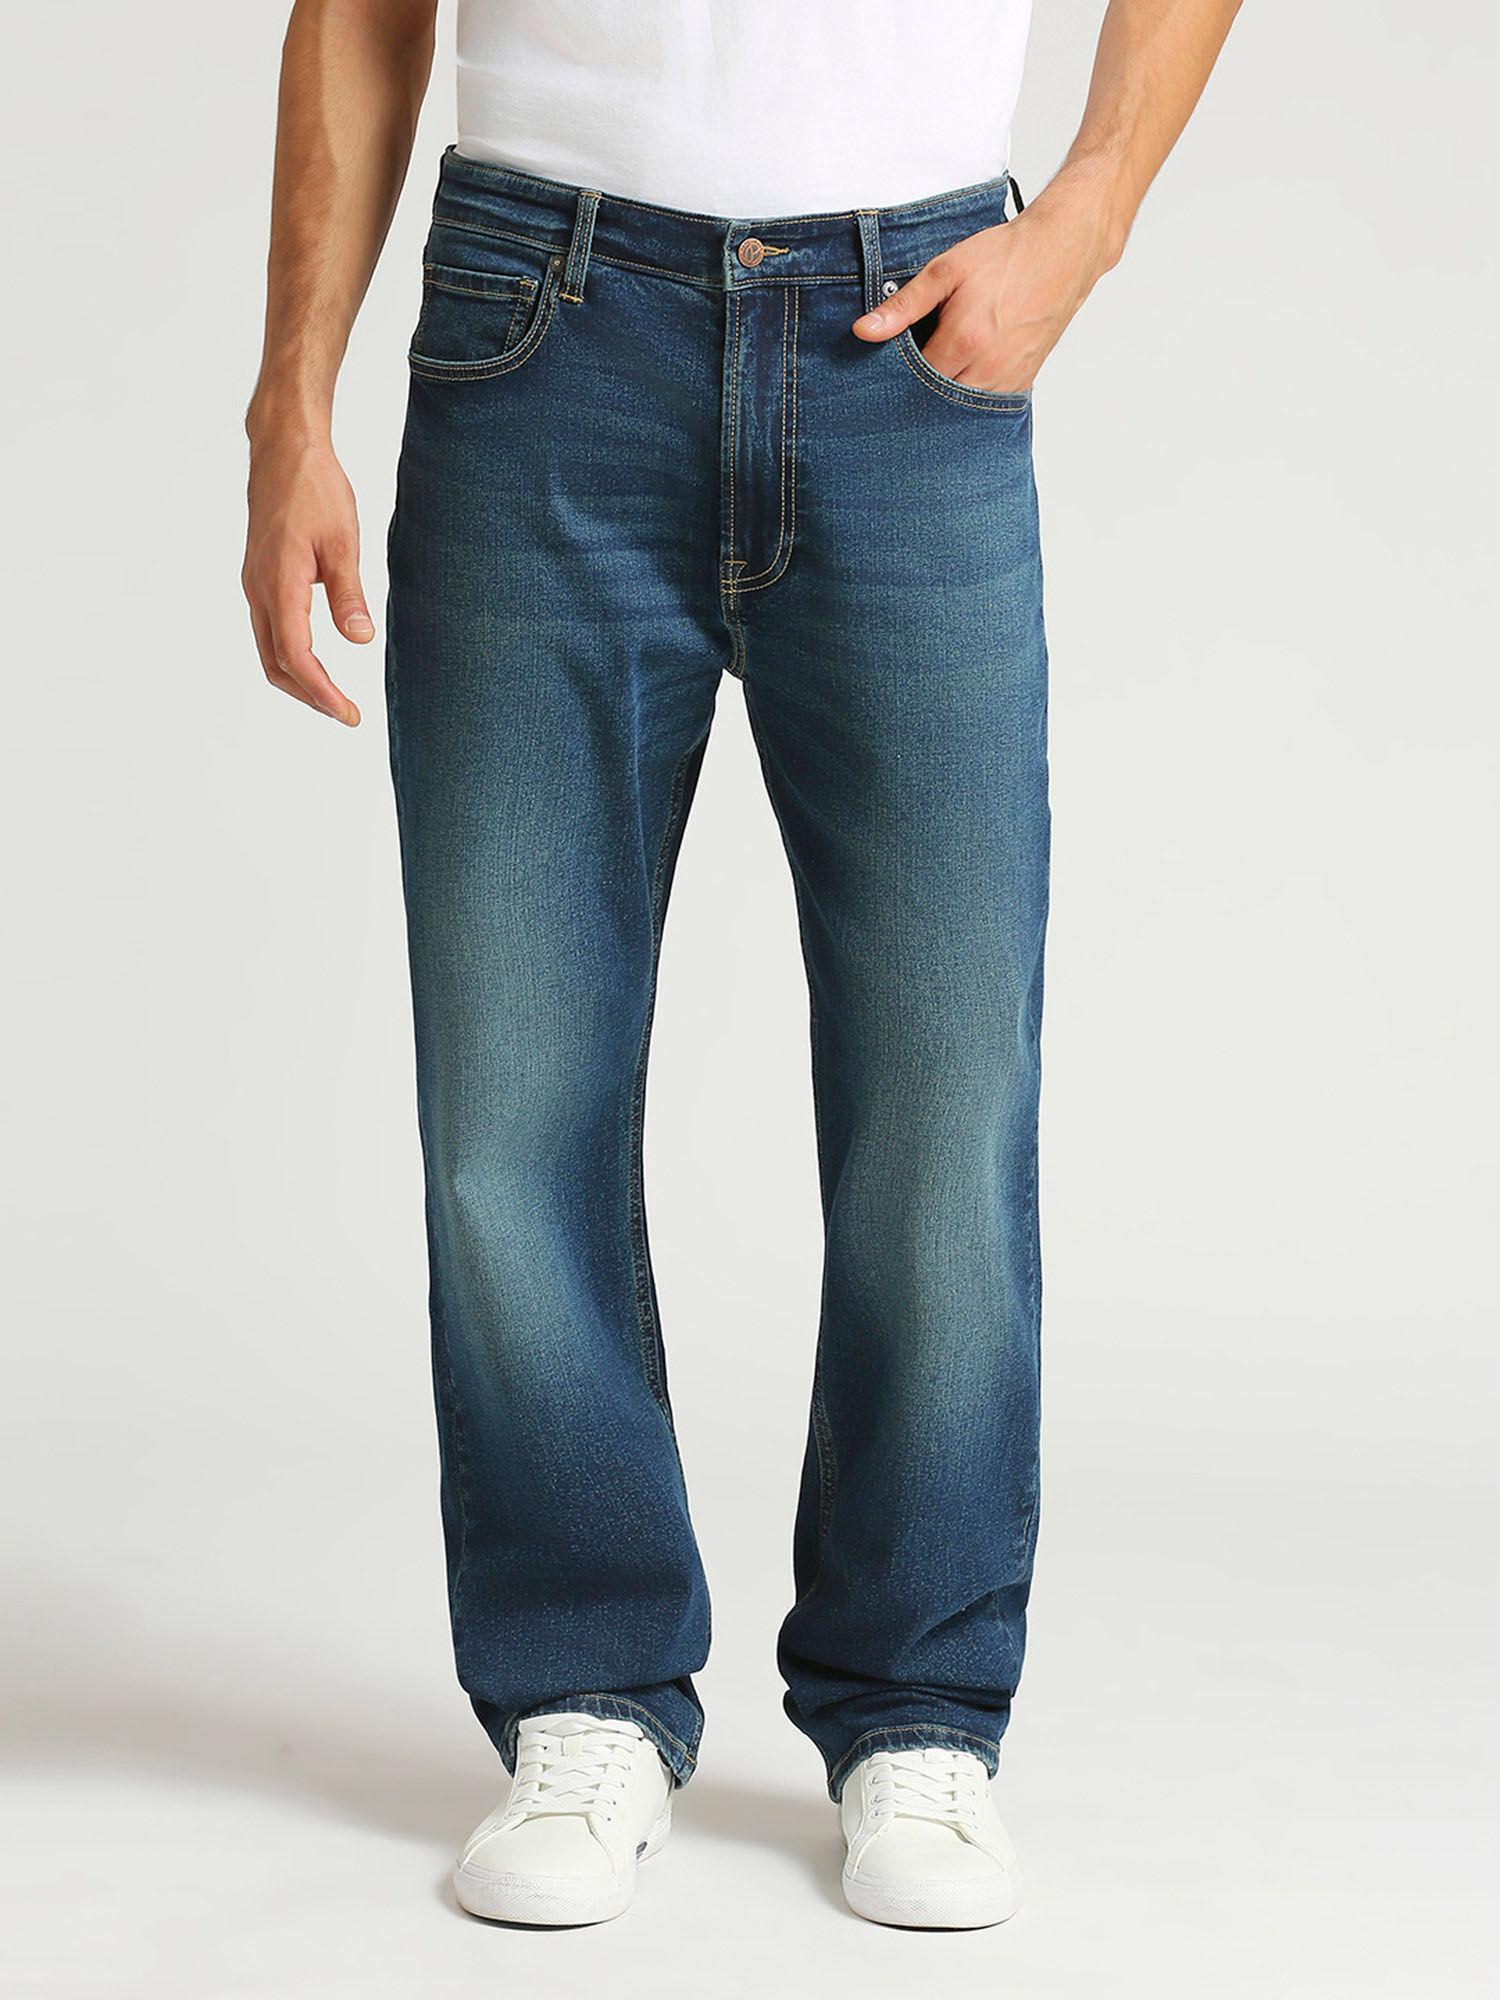 navy-blue-marvis-straight-fit-mid-waist-jeans